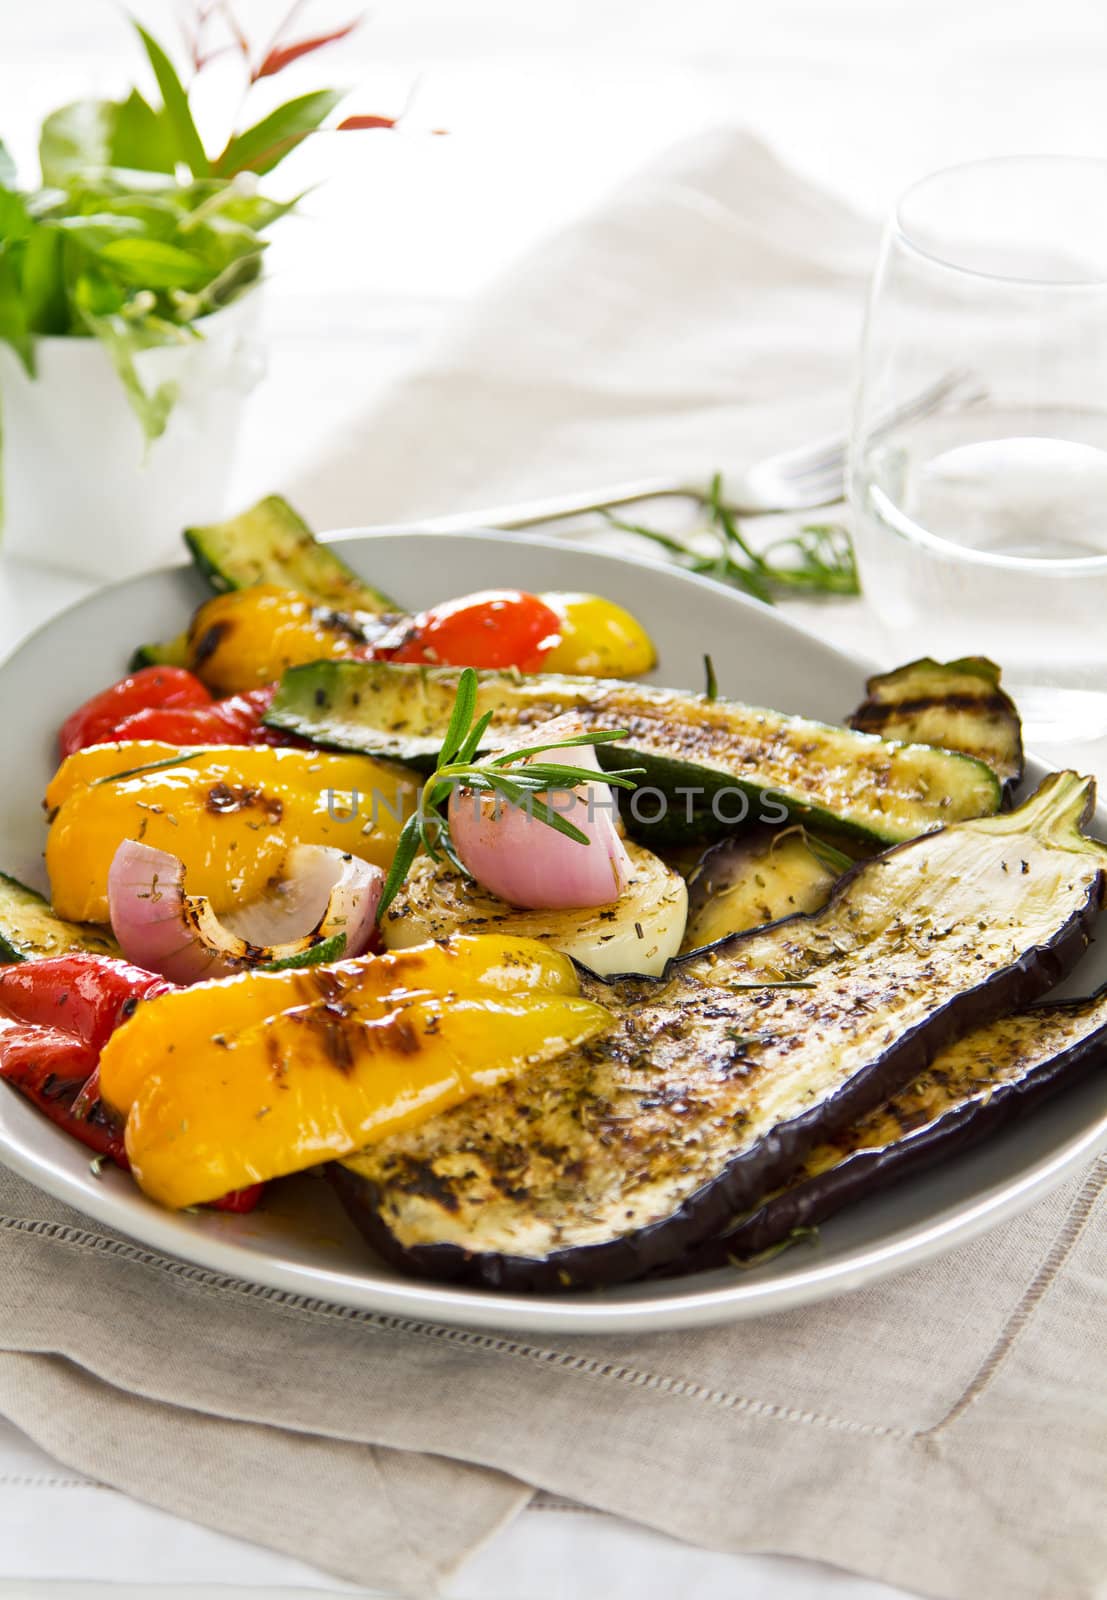 Grilled aubergine,zucchini,pepper,onion,with rosemary and spice salad